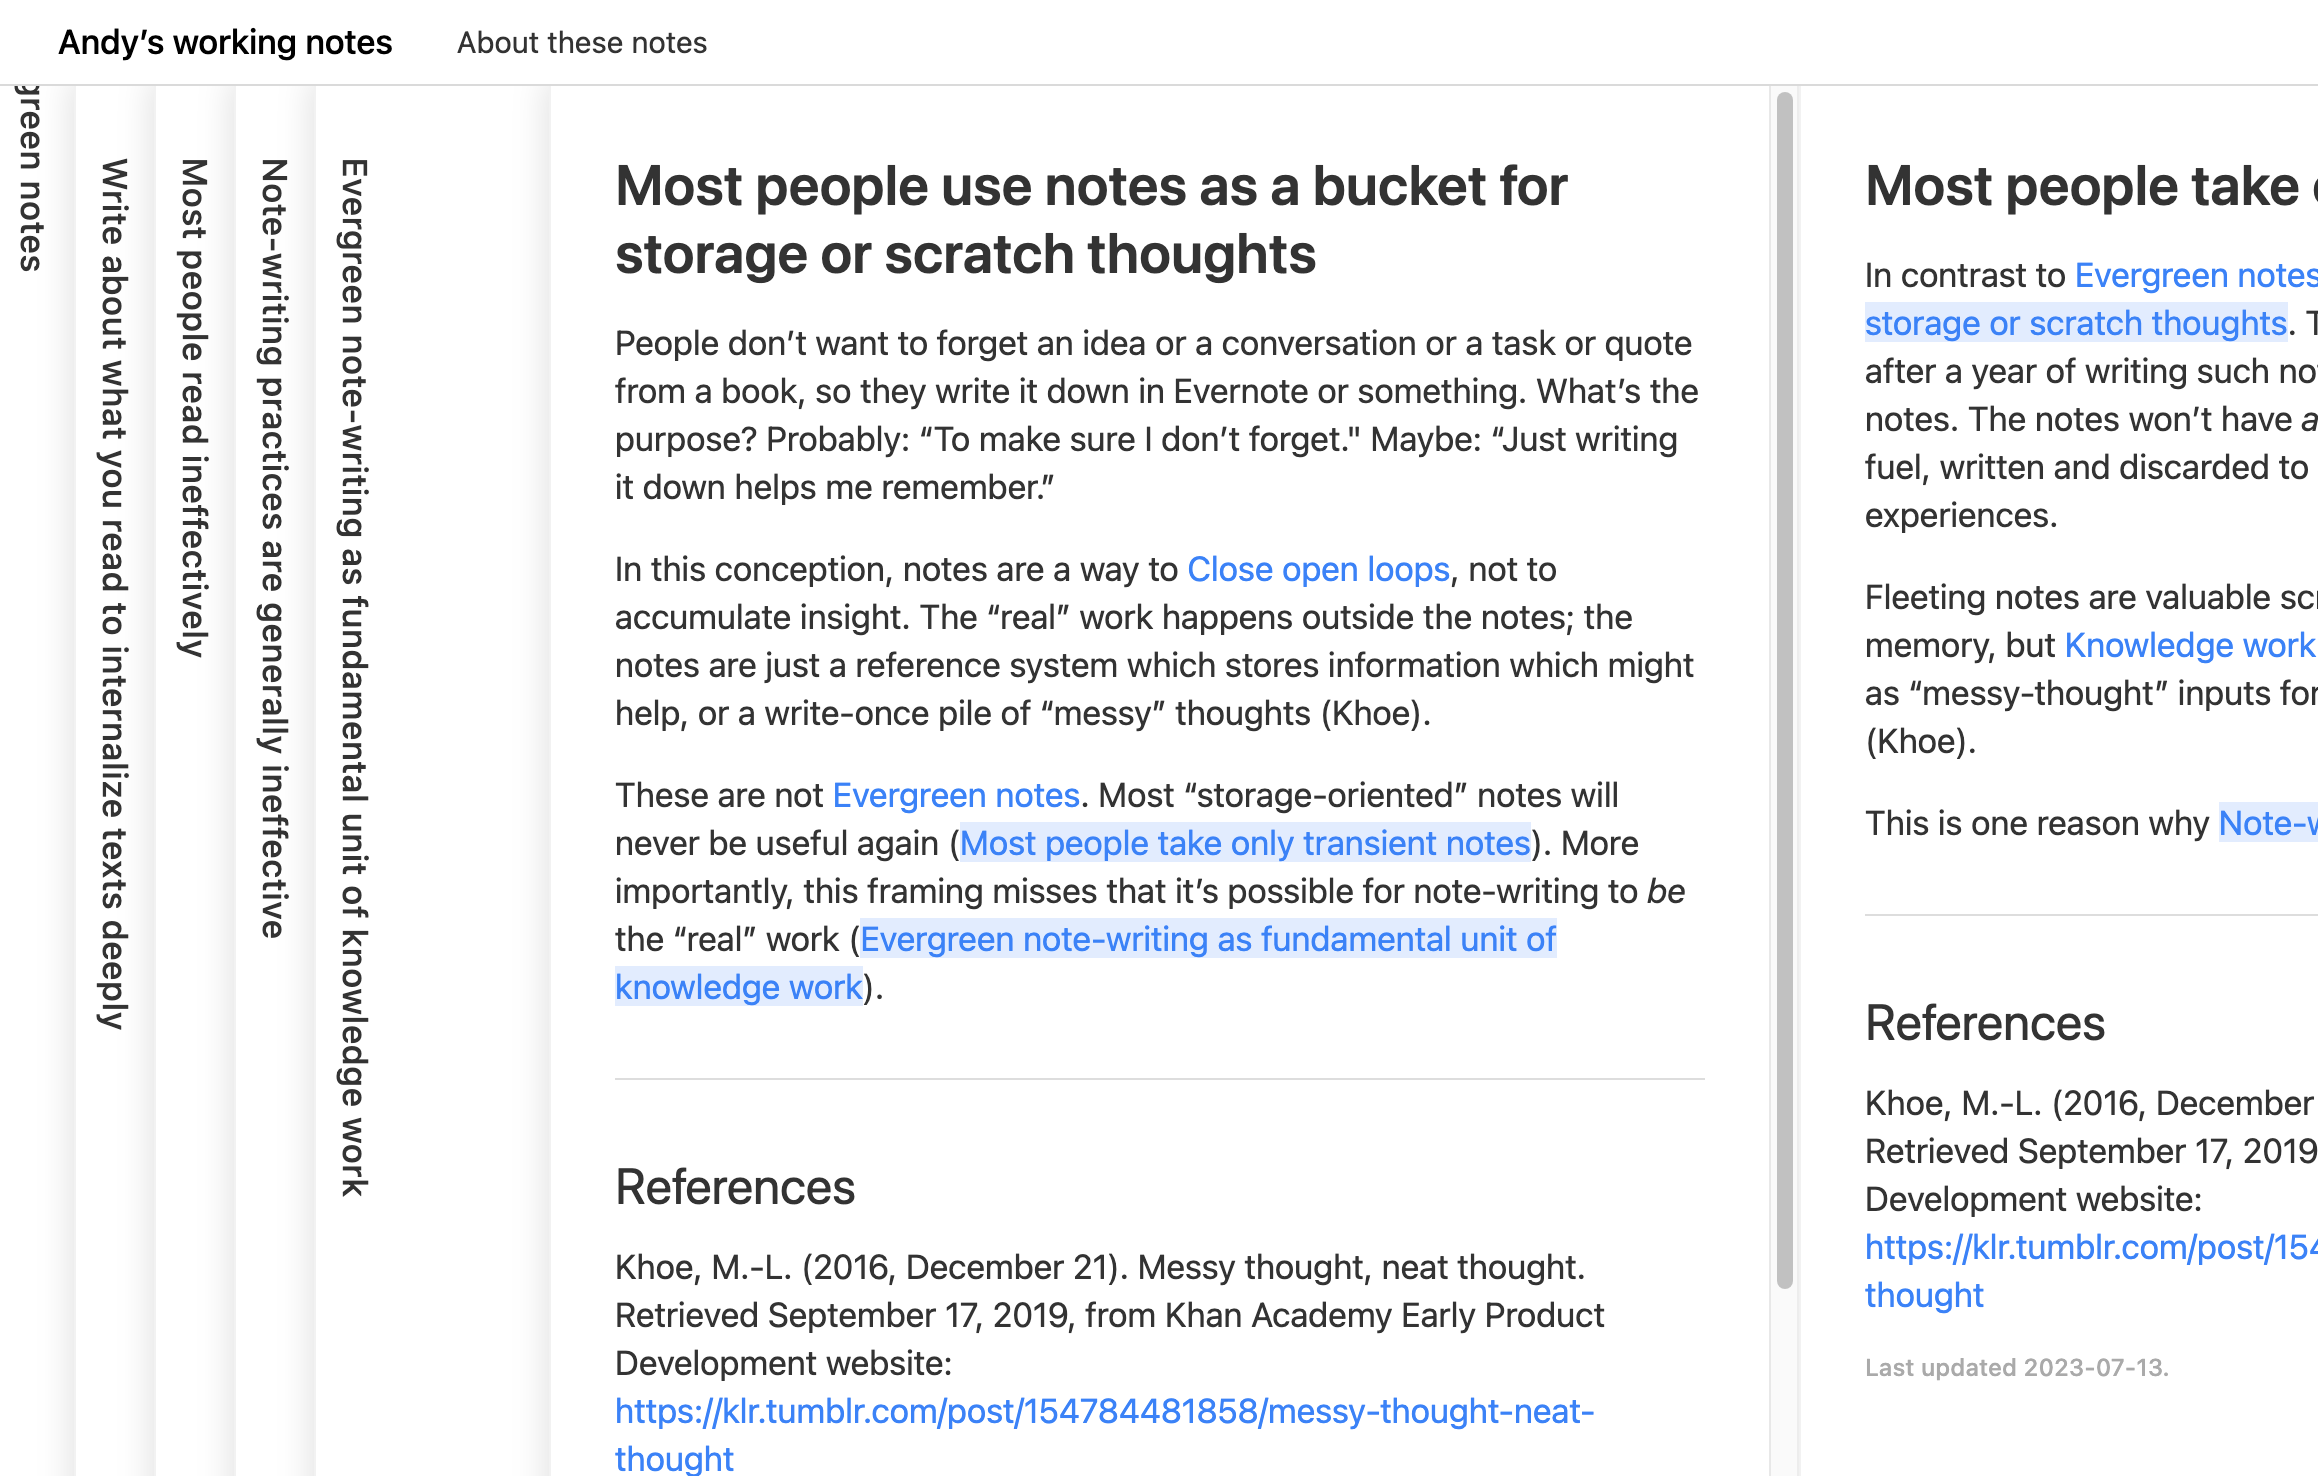 Screenshot of Andy’s Evergreen Notes, showing four collapsed tabs as sidebars on the left side of the page, with two pages open side-by-side as a split screen for the rest of the page. The main page in focus is titled “Most people use notes as a bucket for storage or scratch thoughts”.